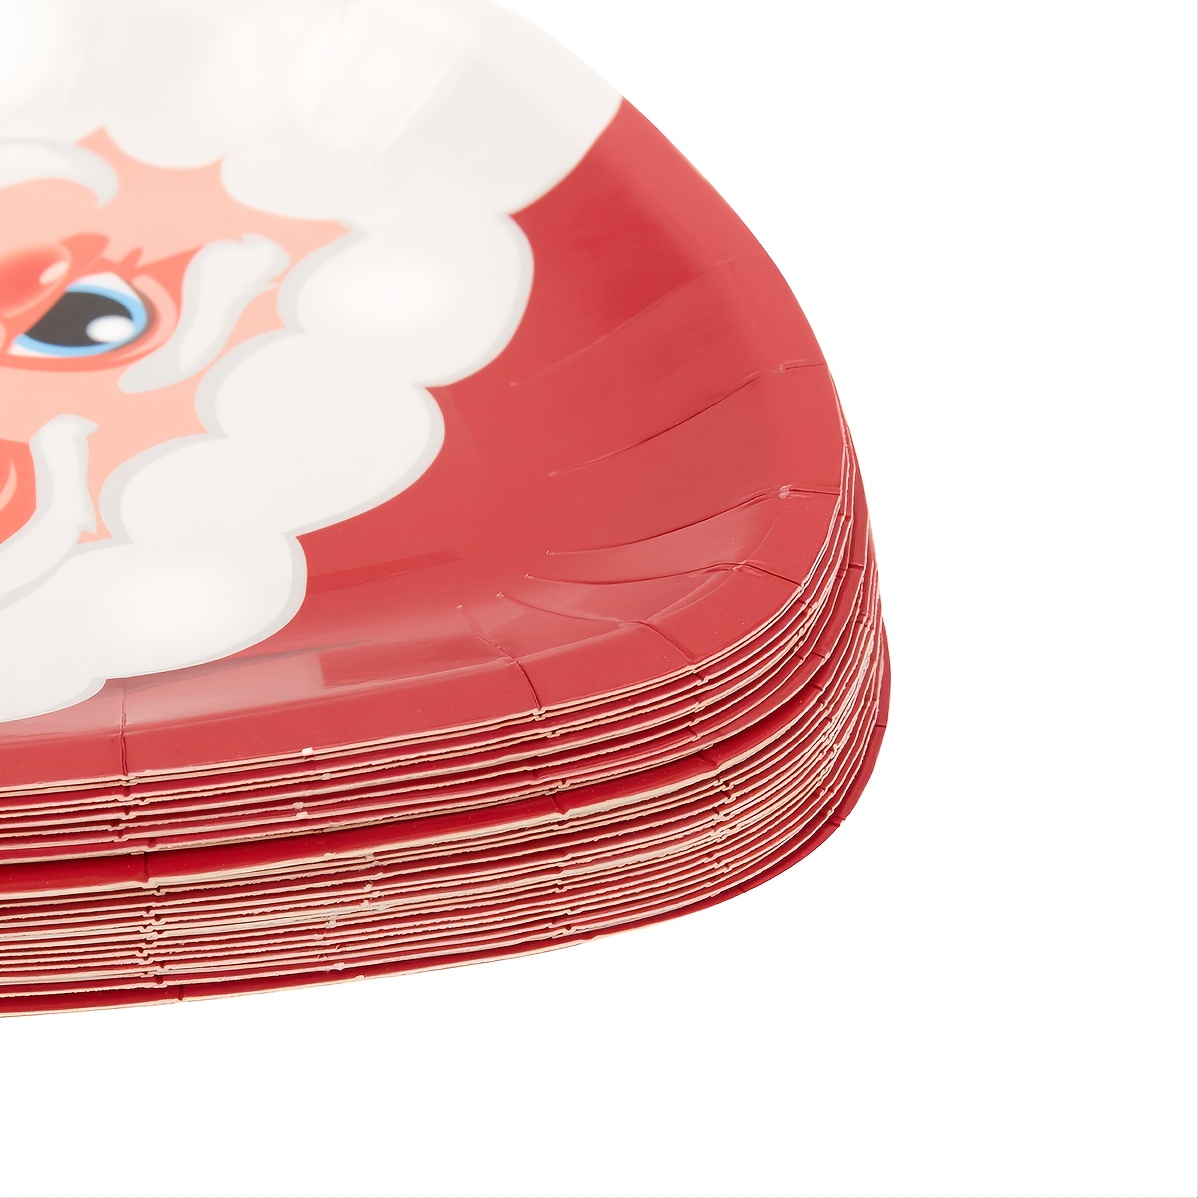 10pcs-9in Disposable Paper Plates With Santa Claus Print, Suitable For  Christmas Party, Birthday, Outdoor Bbq And Camping